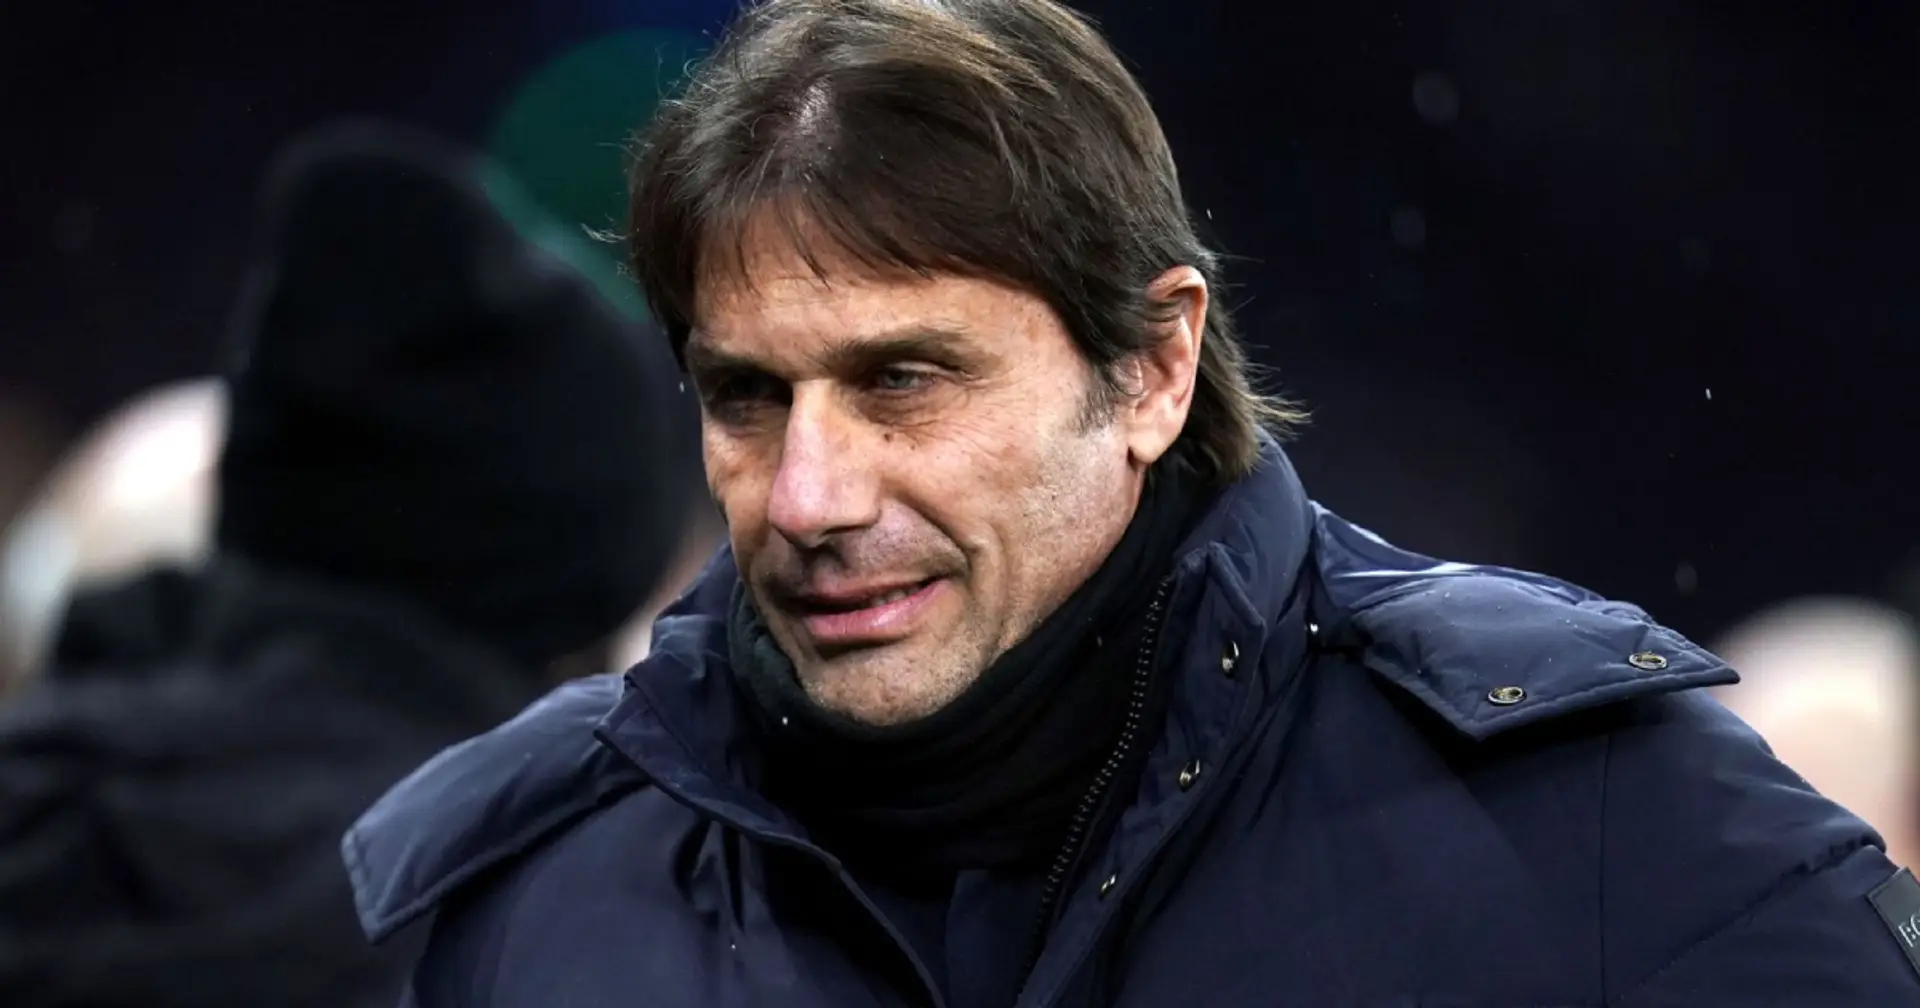 Antonio Conte lined up for new top job & 3 more under-radar stories